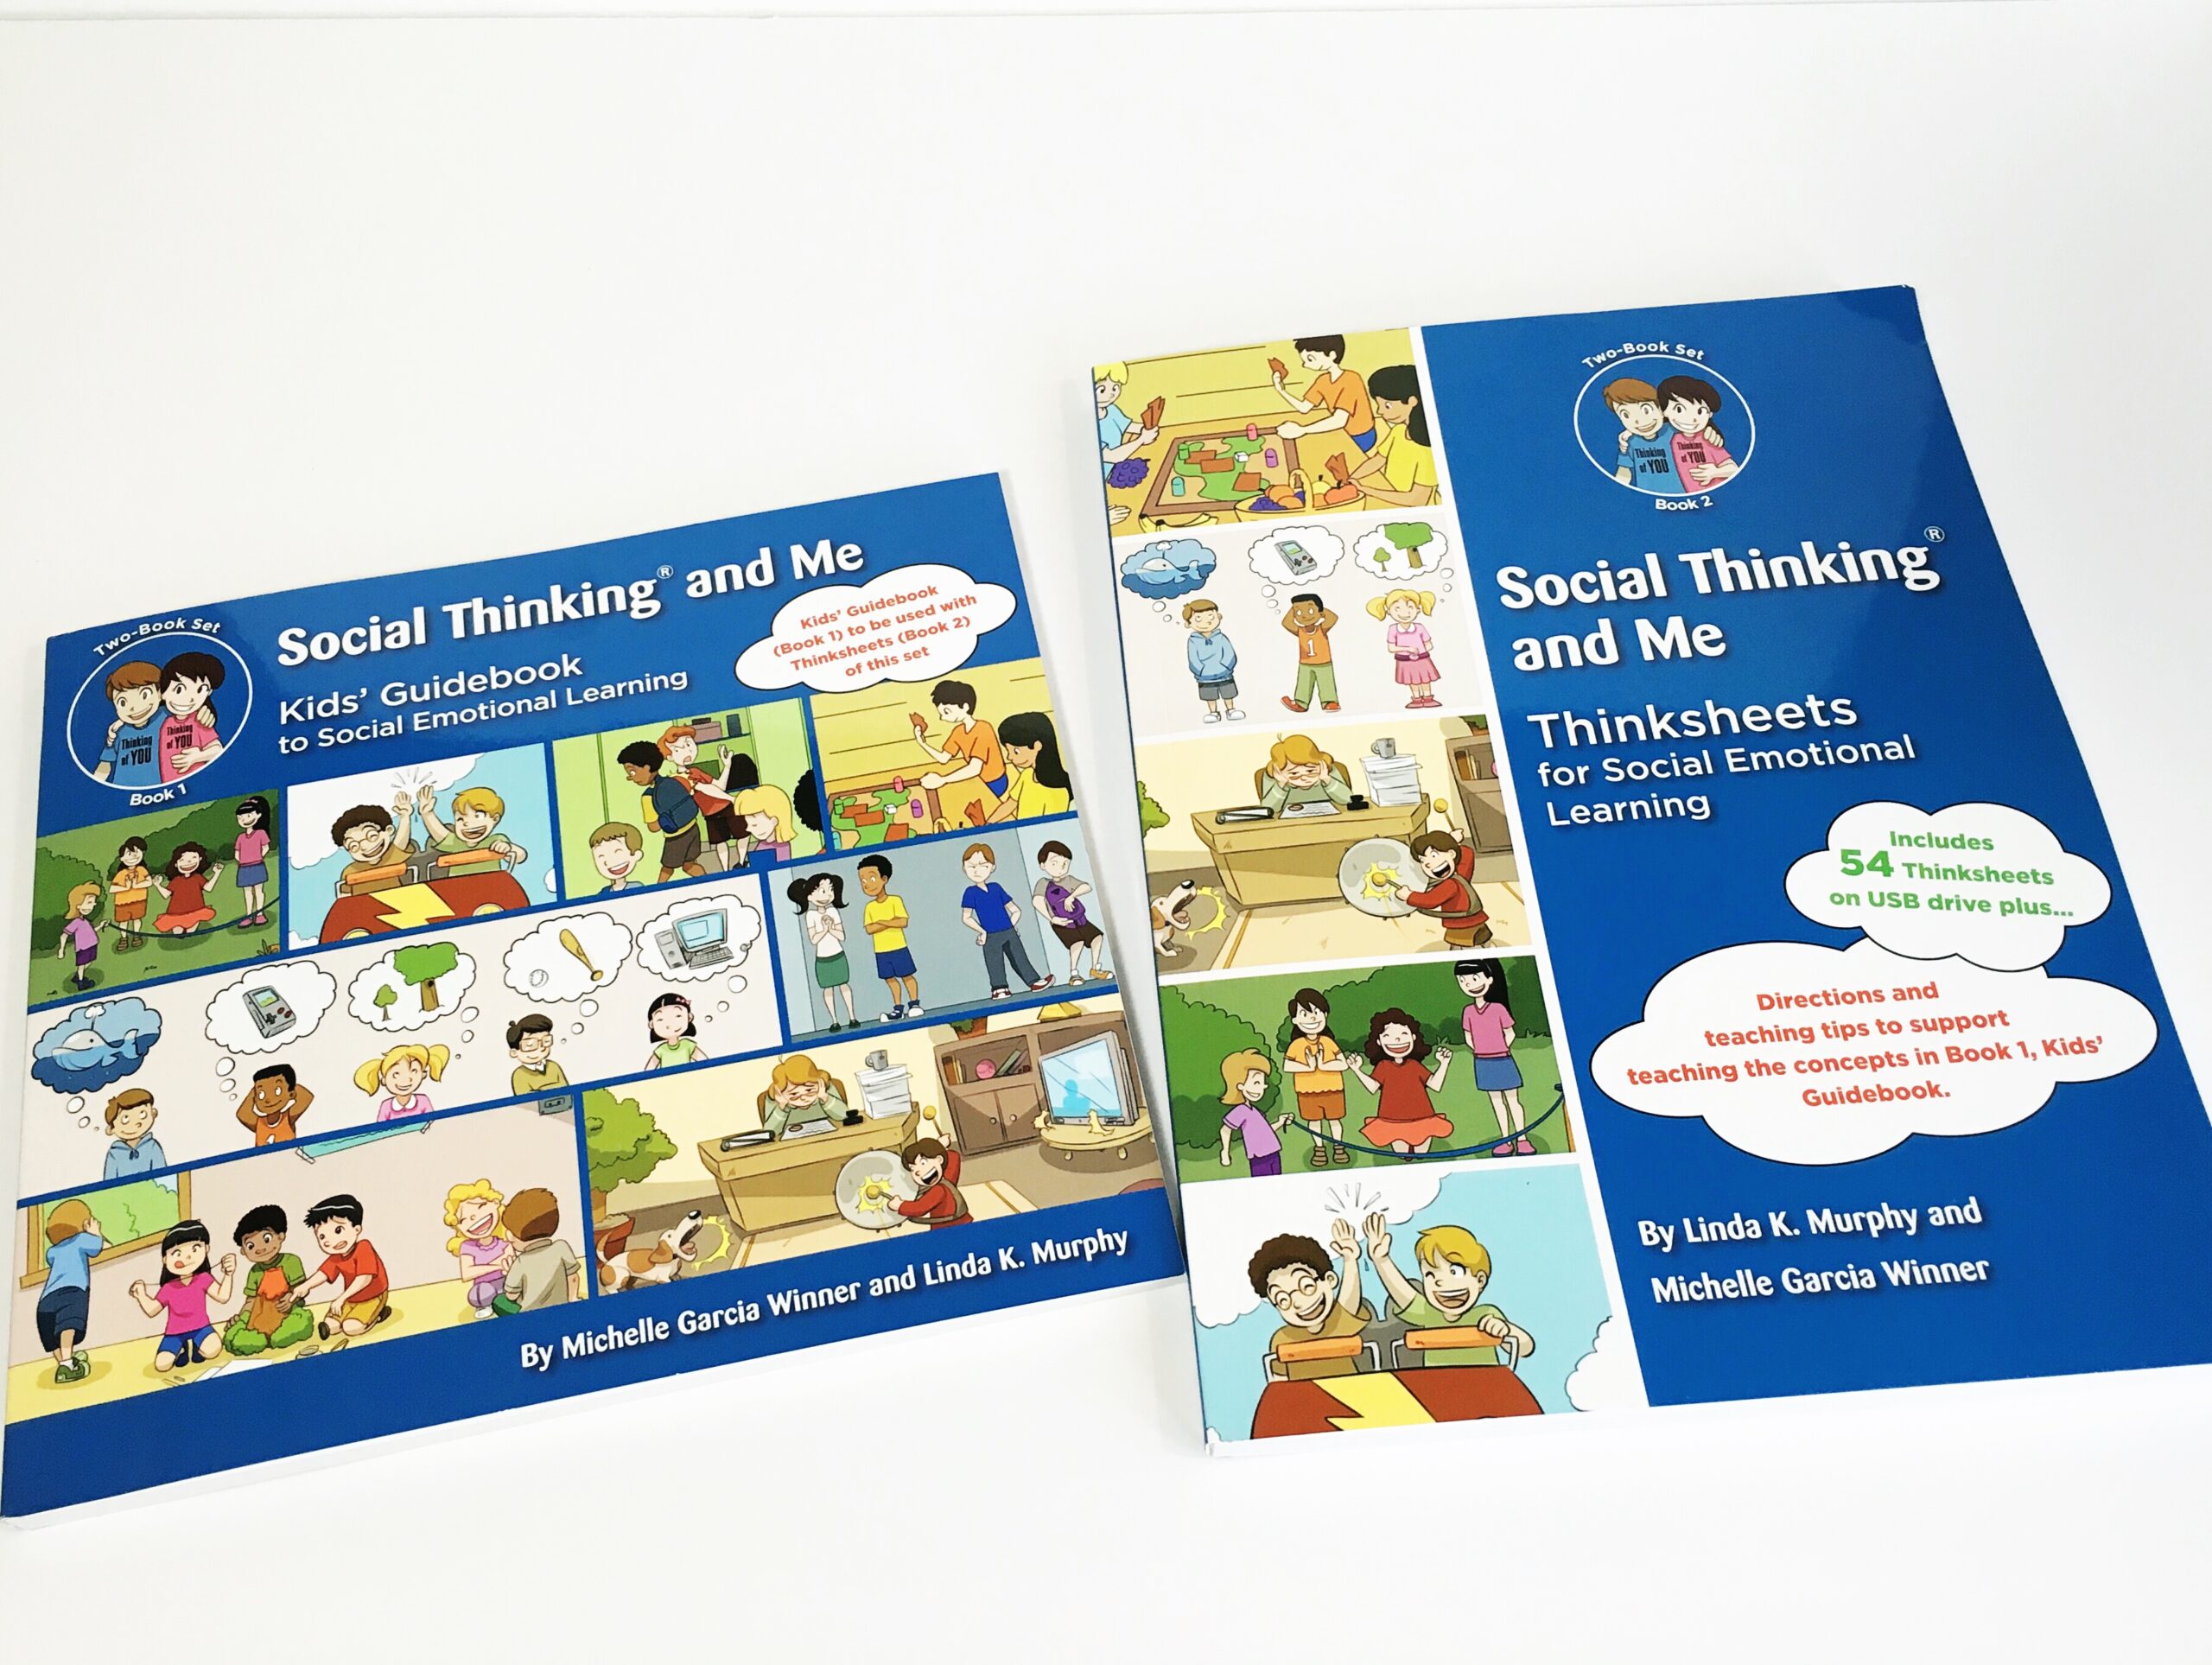 Social Thinking and Me: Review